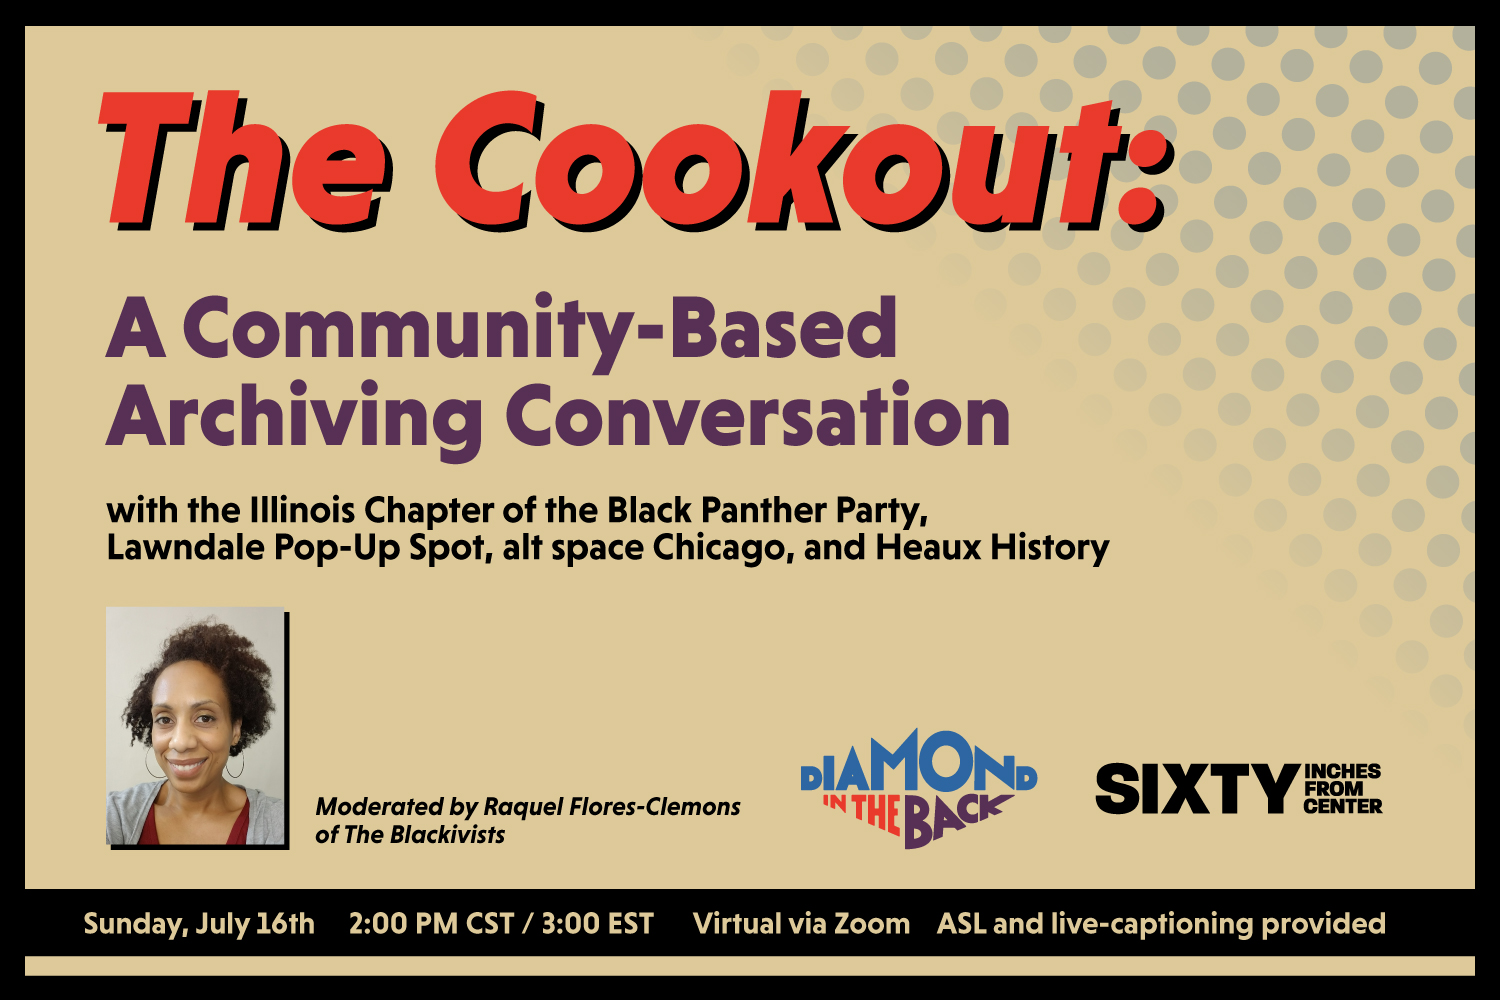 The Cookout: A Community-Based Archiving Conversation